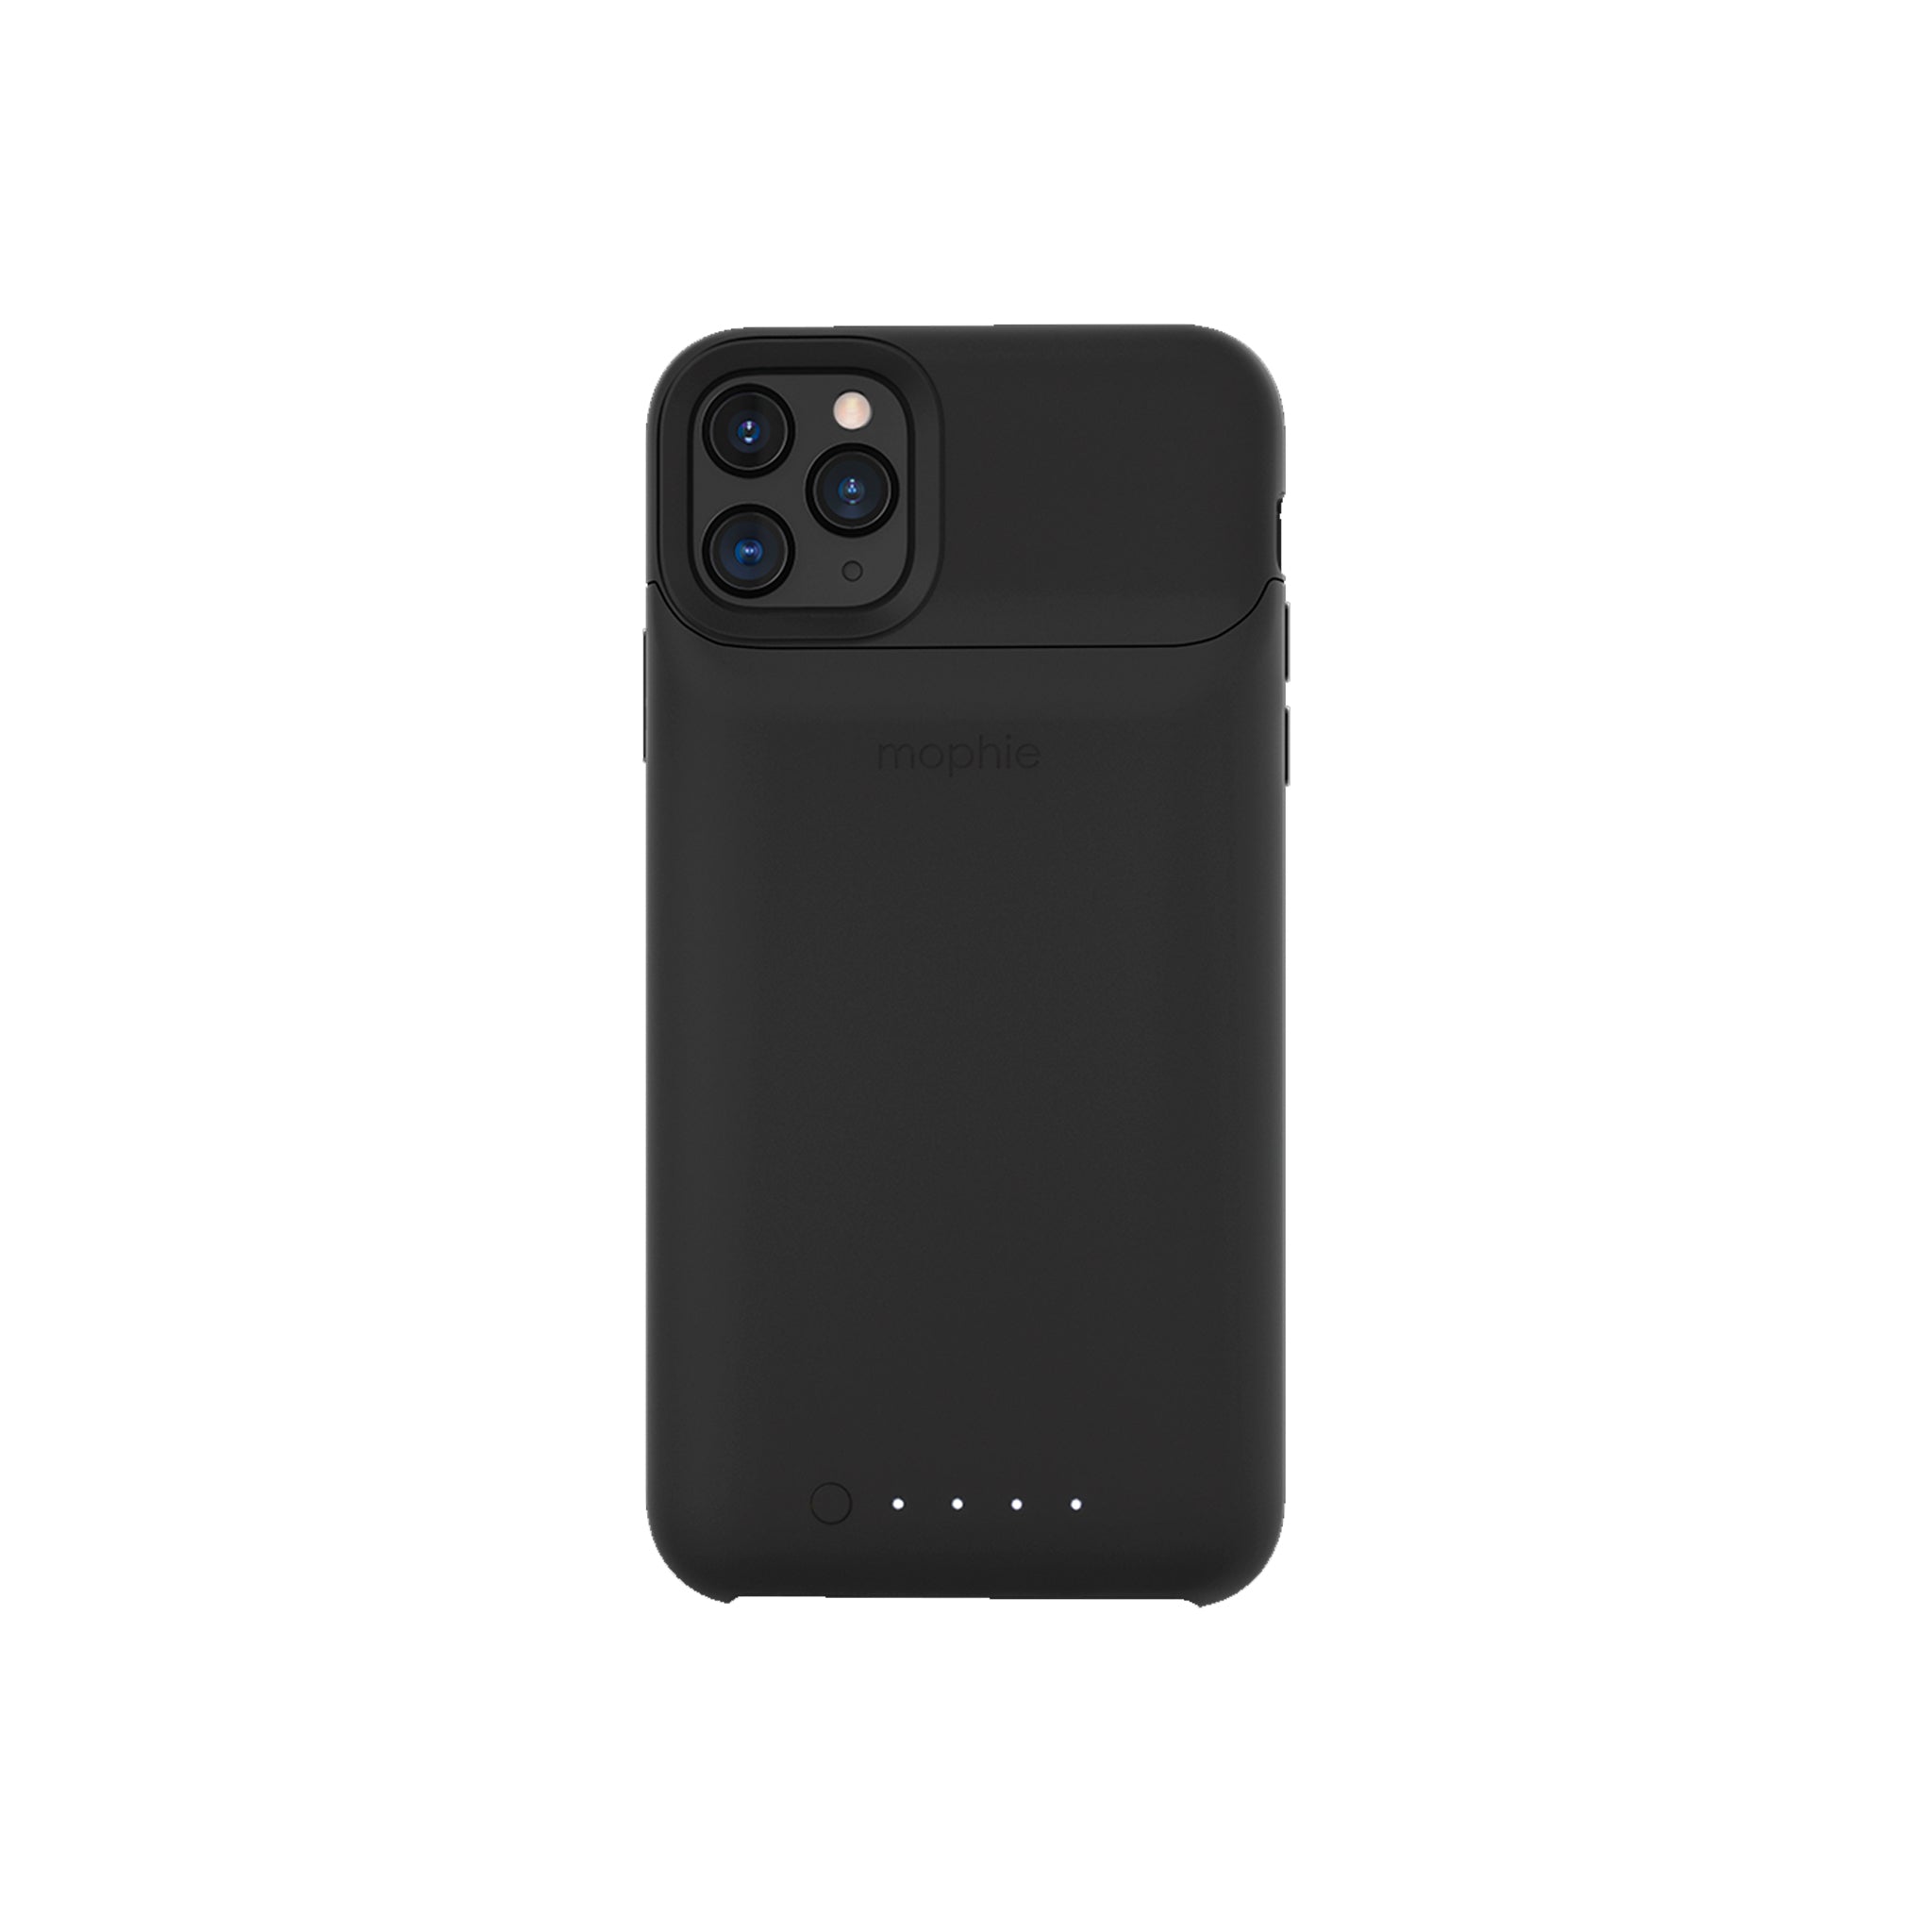 Mophie - Juice Pack Access Power Bank Case 2,200 Mah For Apple Iphone 11 Pro Max - Black